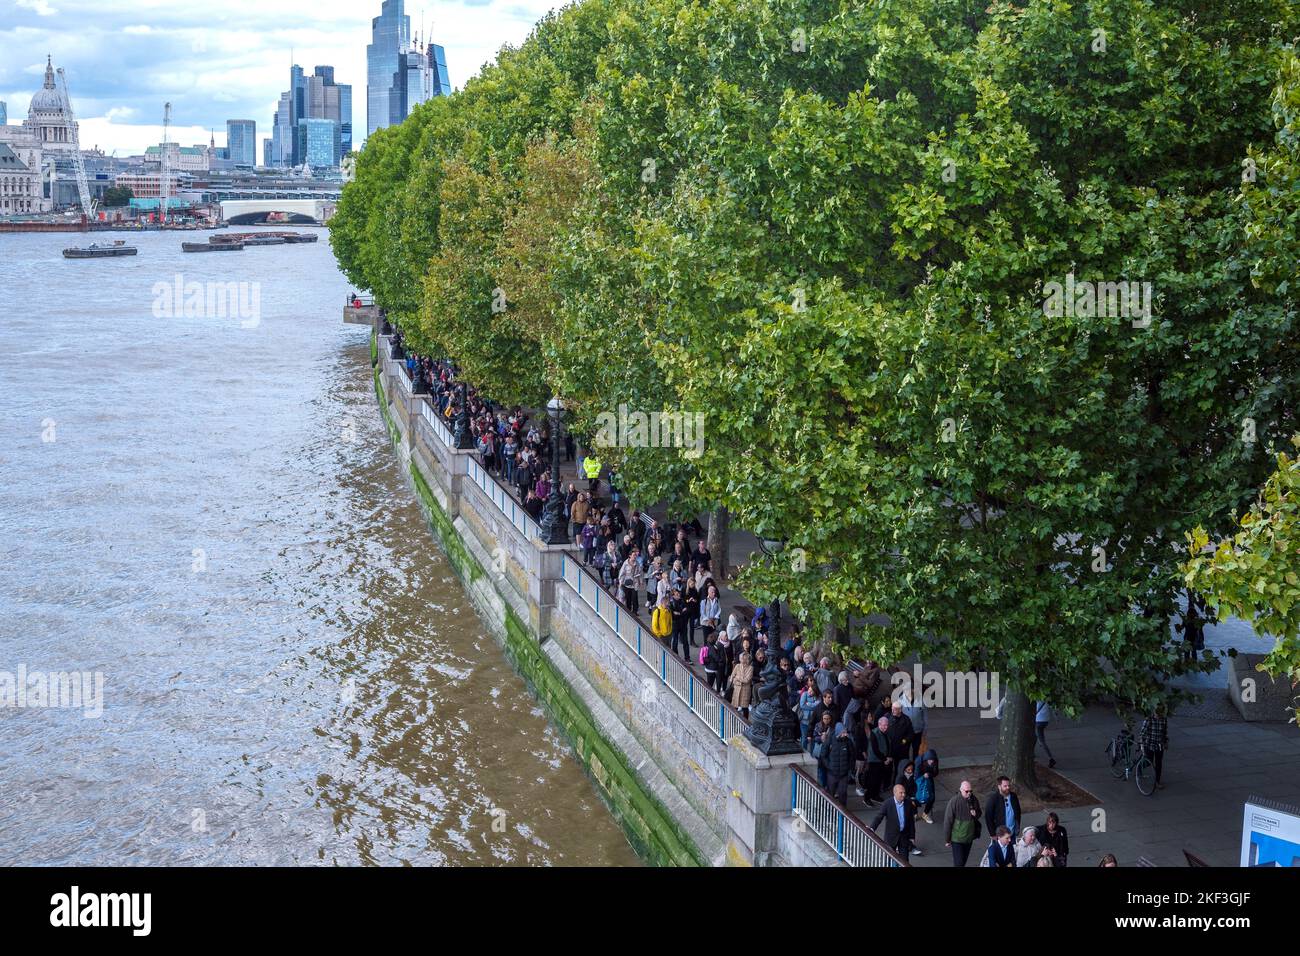 The queue at the South Bank in London to see Britain’s late Queen Elizabeth II lying in state with St Paul’s & the City of London in the background. Stock Photo